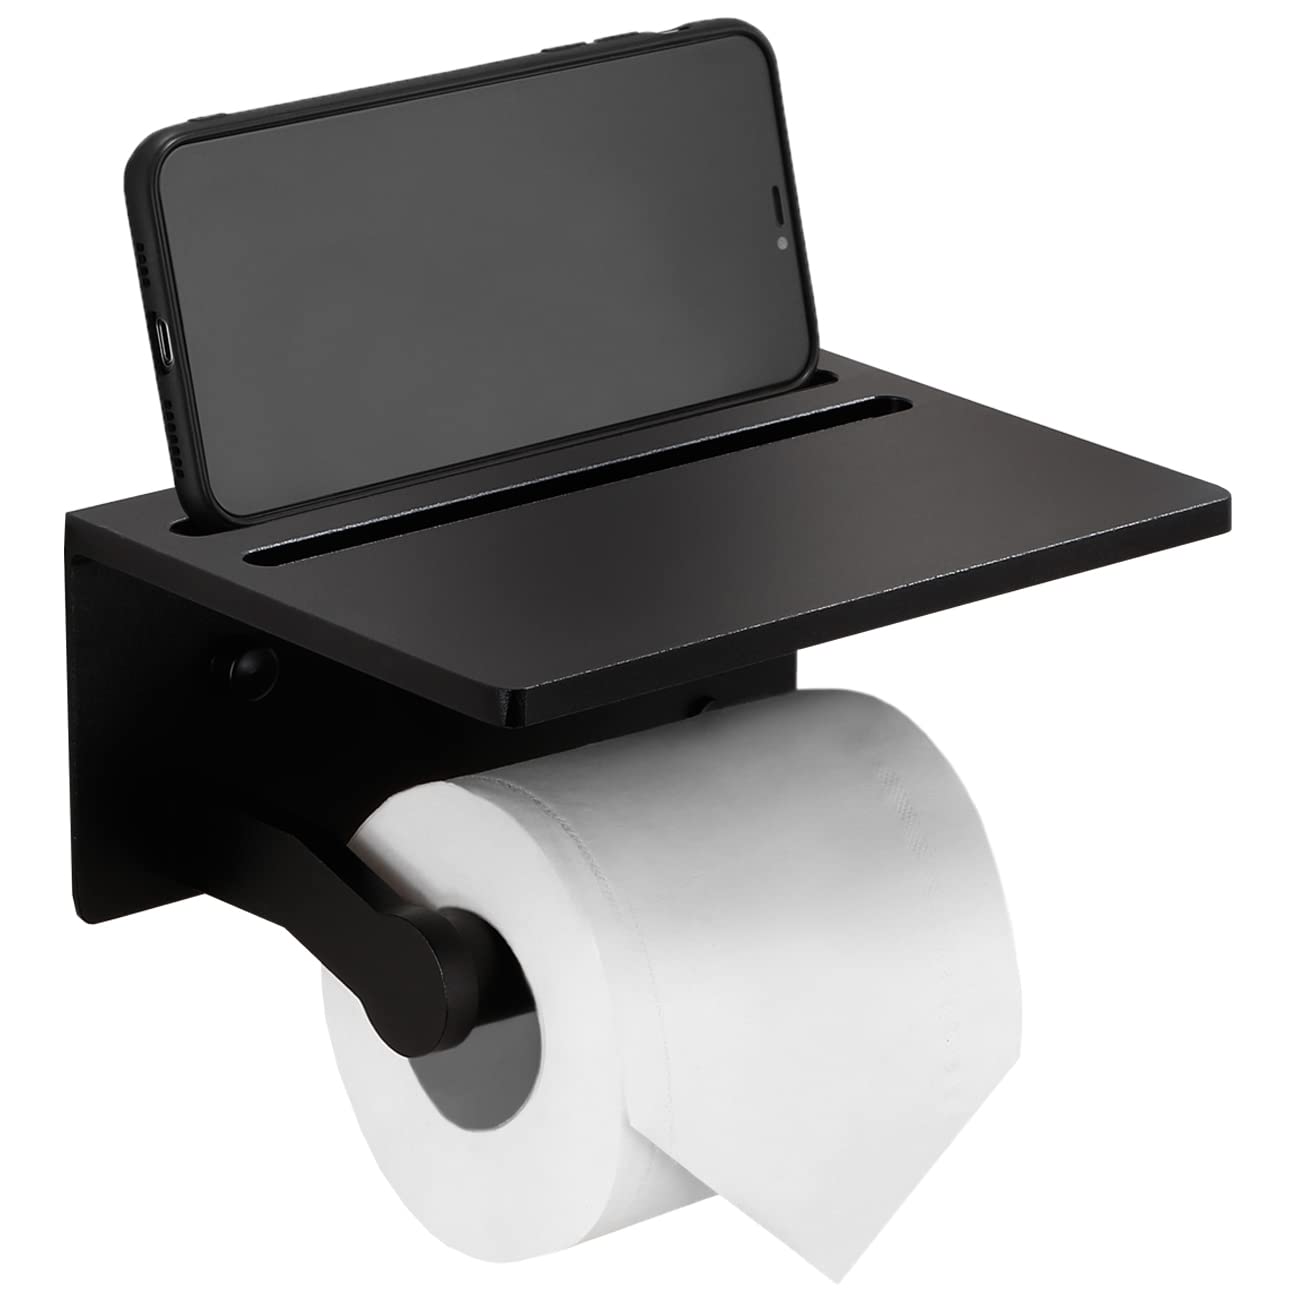 Homely Trove Smarthome Toilet Paper Holder with Shelf, Black Anti-Rust Aluminum Tissue Roll Holder with Mobile Phone Storage Shelf for Bathro